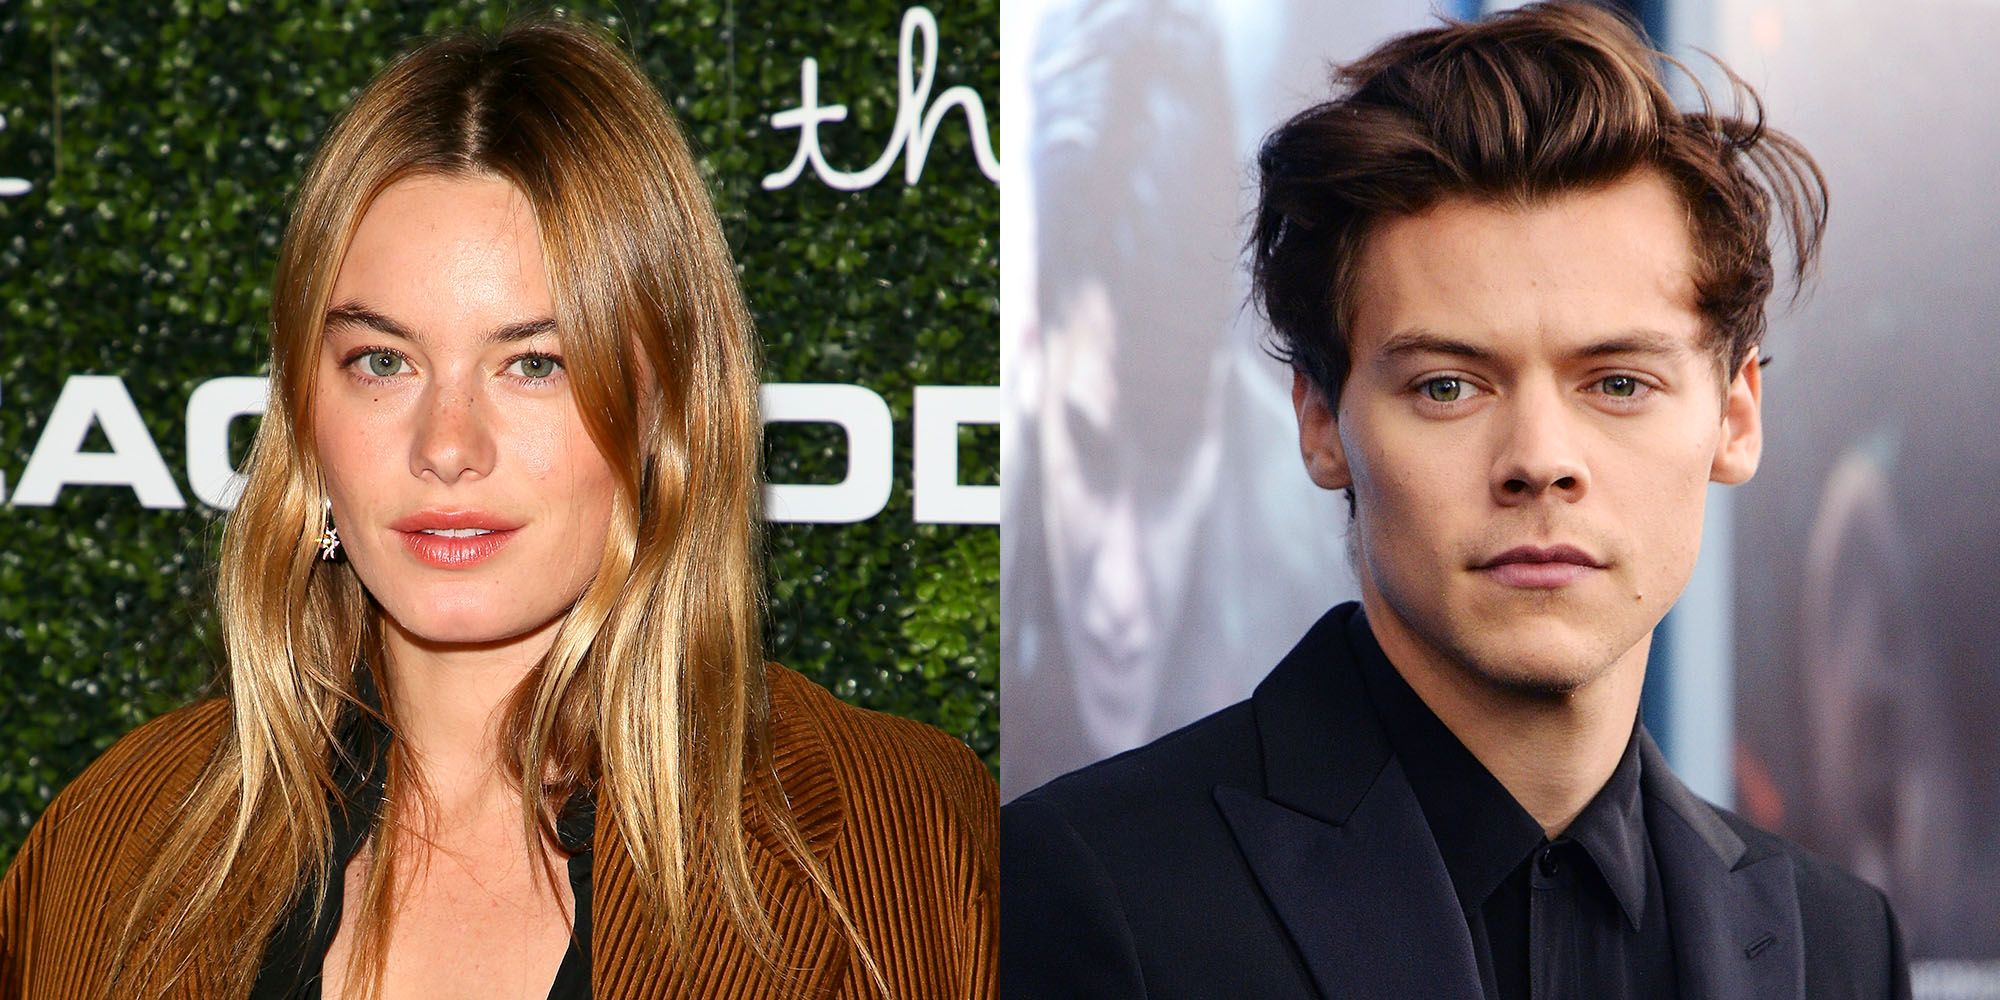 What Harry Styles Cherry Lyrics Reveal About His Camille Rowe Breakup